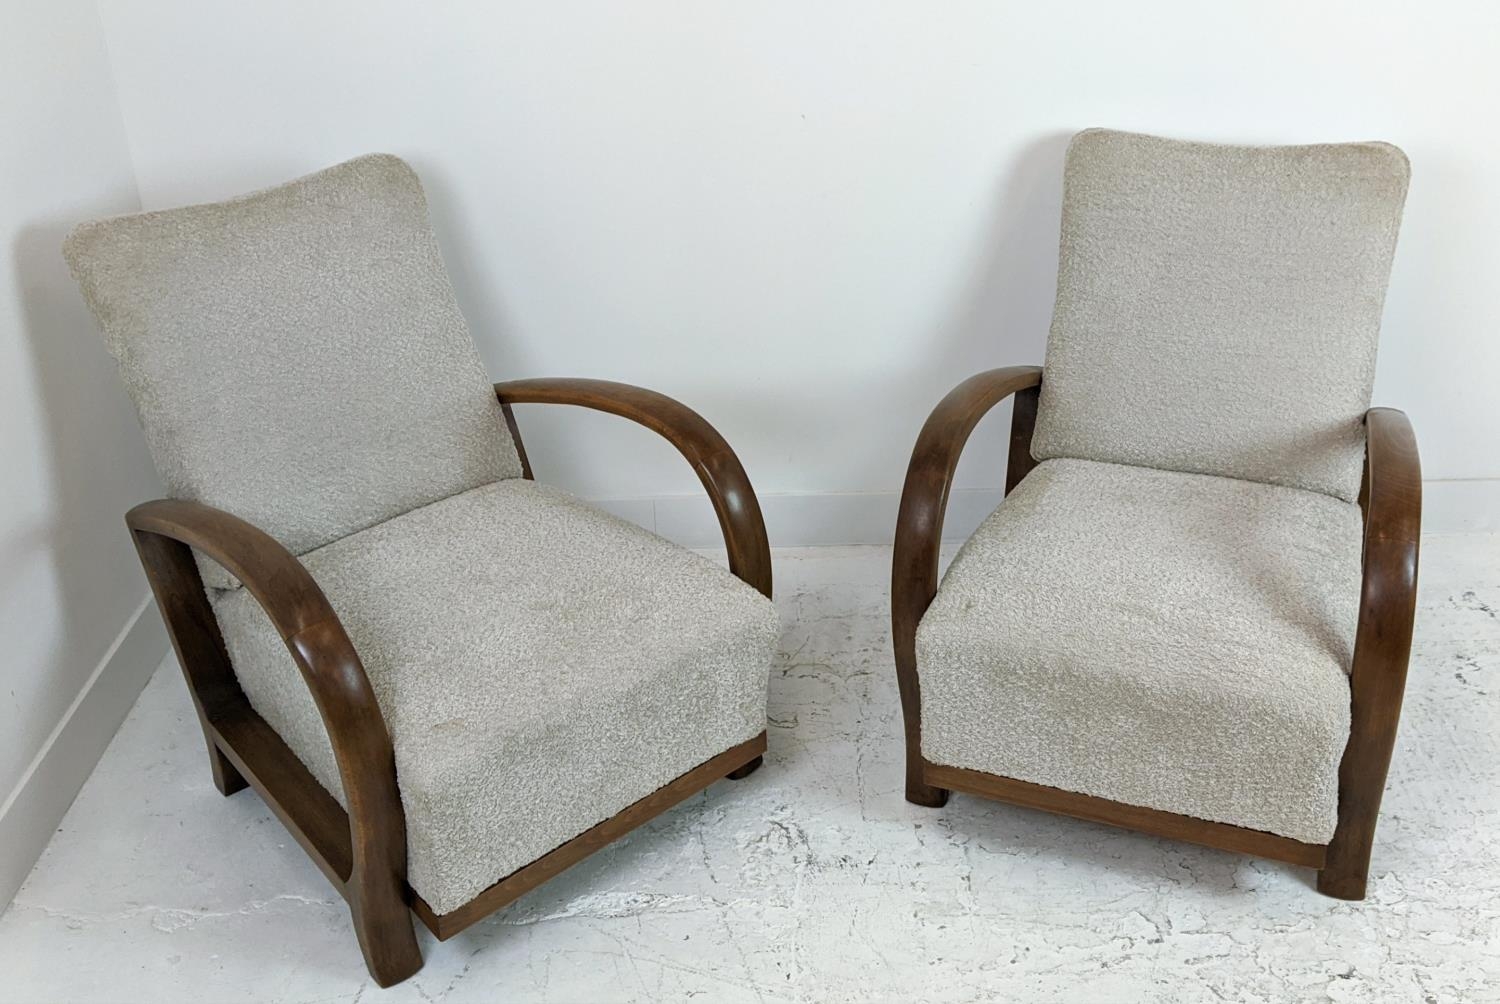 HALABALA ARMCHAIRS, a pair, mid 20th century beechwood and boucle wool upholstered, 89cm H x 66cm - Image 2 of 8